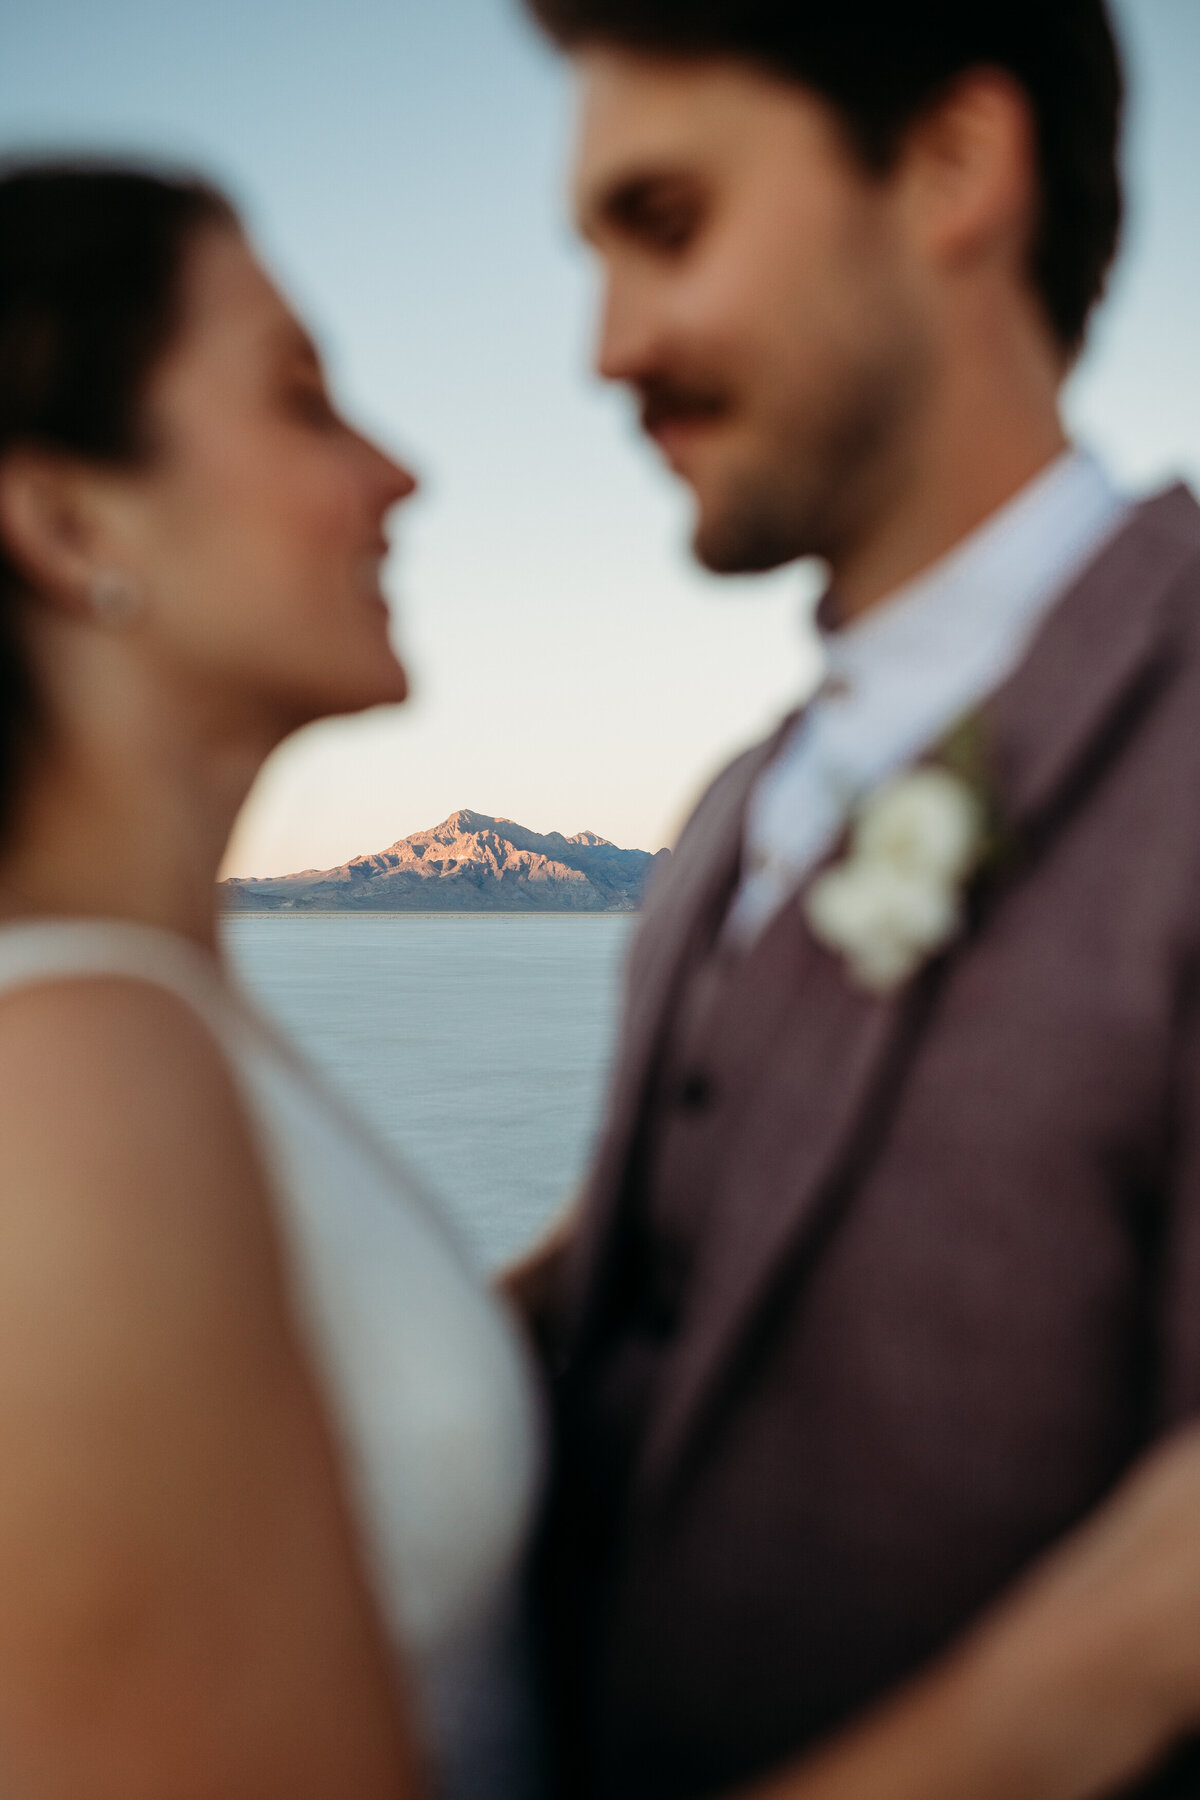 Out-of-focus couple with a mountain landscape in the background